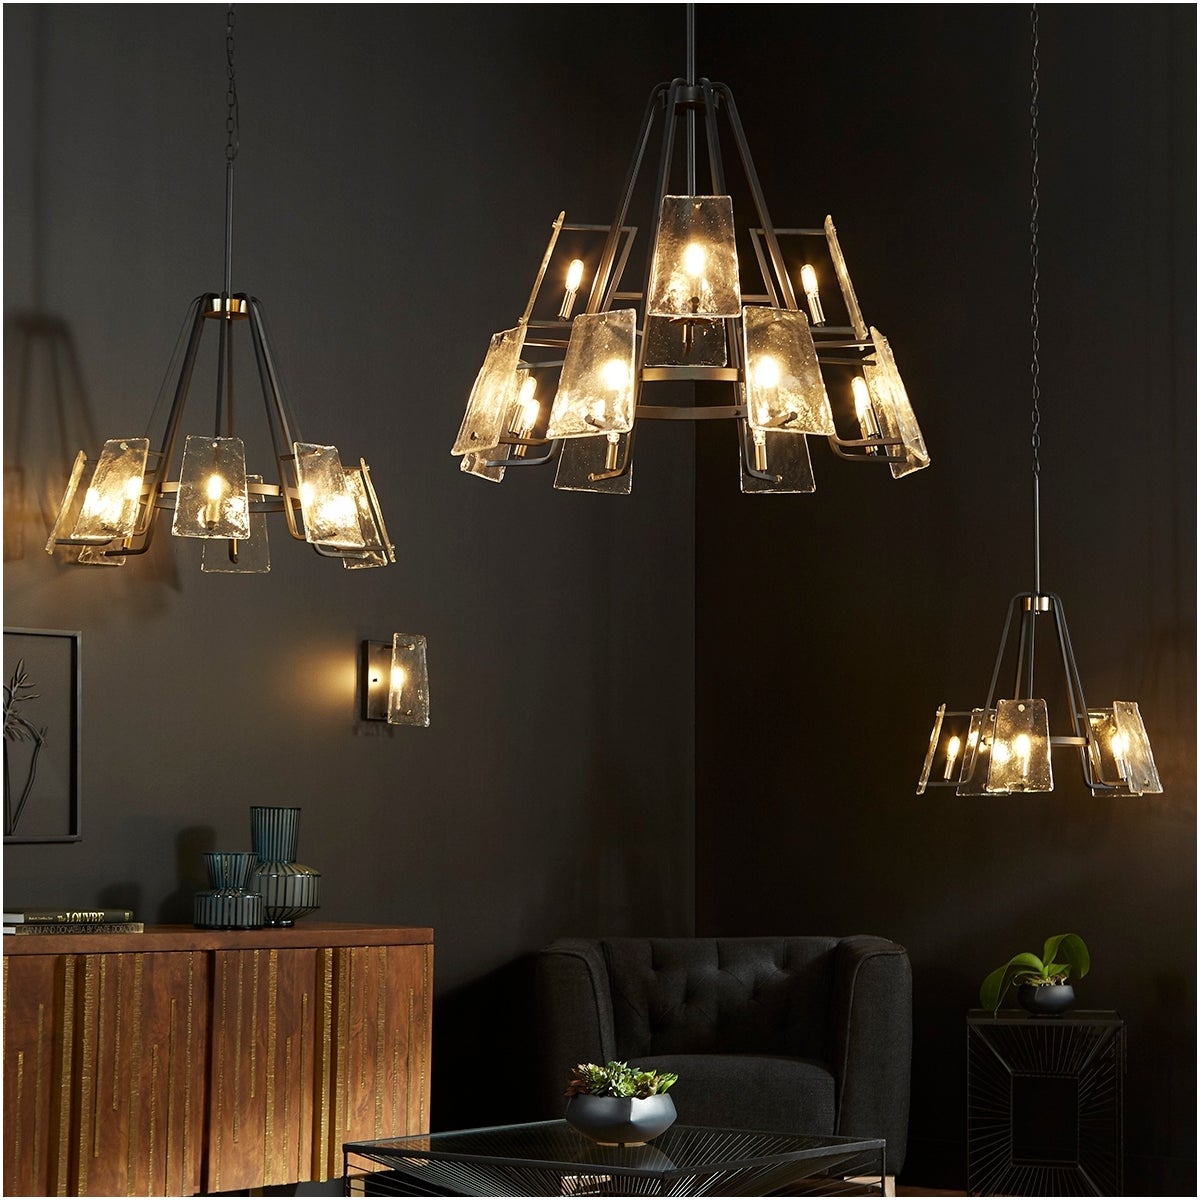 Outdoor chandelier with conical shape, linear framing, and frosted glass trapezoid shades. Mid-century modern design with aged brass-noir finish. Suspended from chain and stem mounting system. Suitable for covered outdoor spaces or washrooms. 36"W x 30"H.